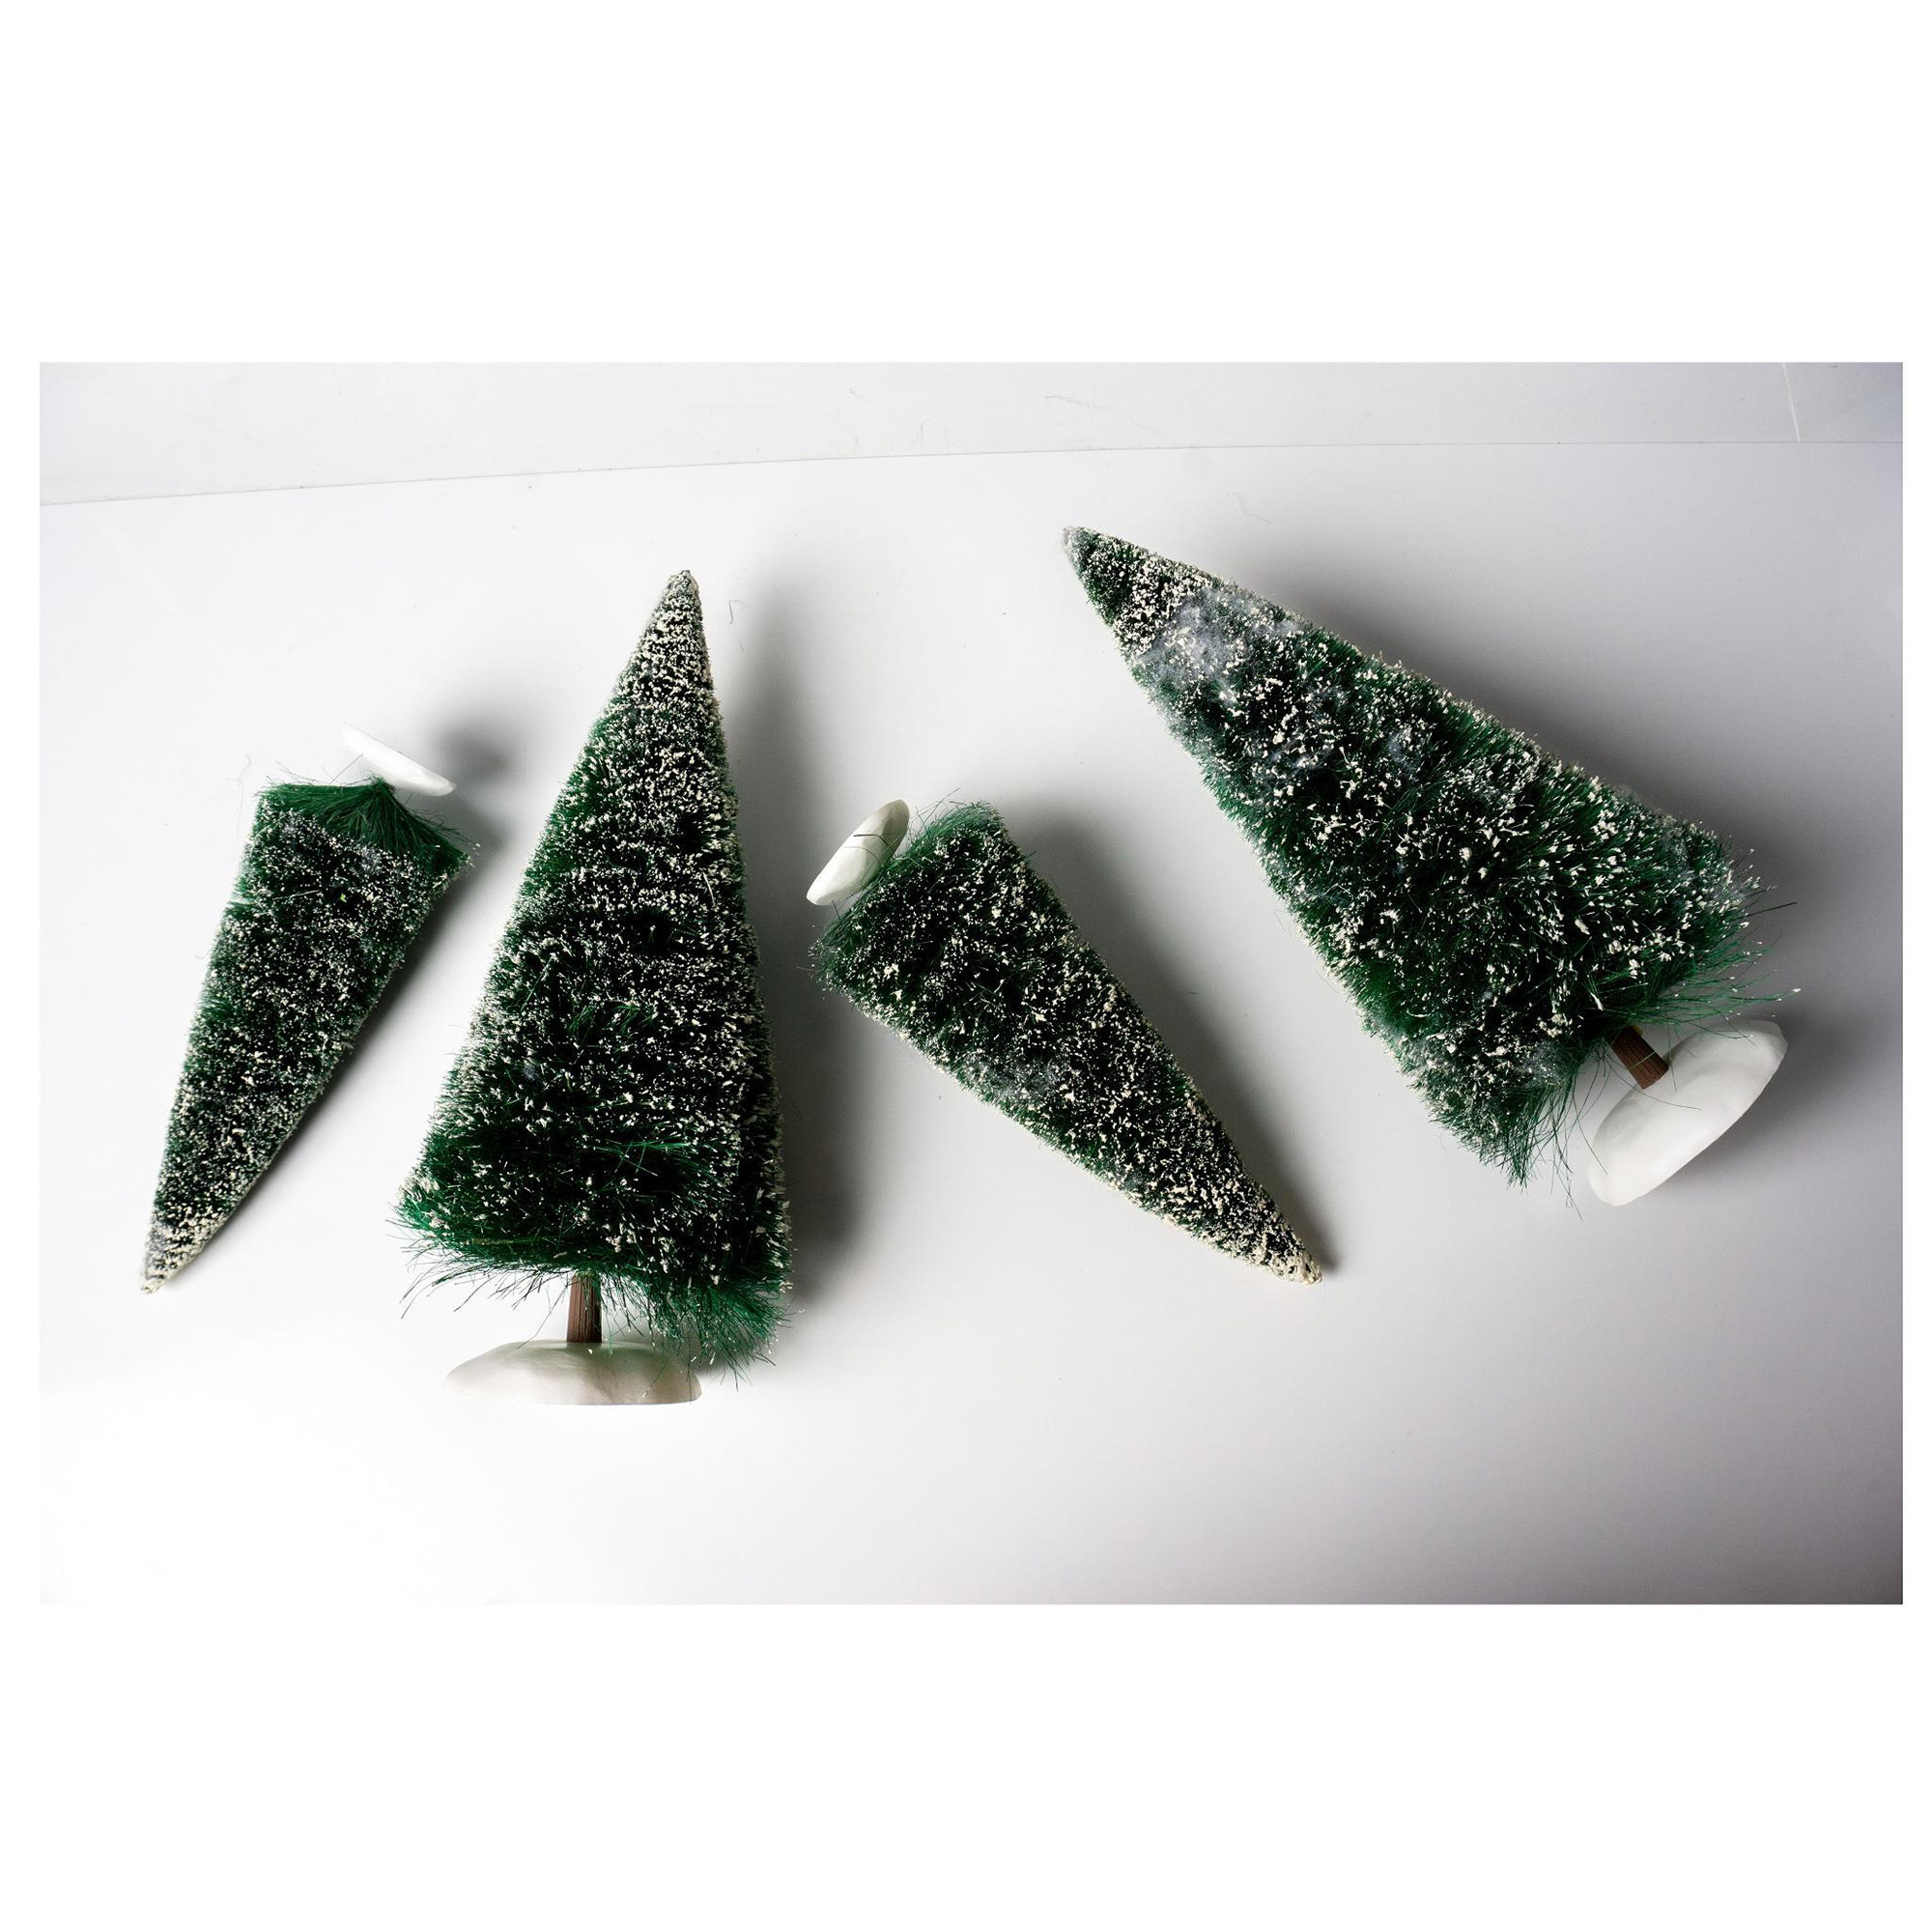 4pc Department 56 Accessory Figurines, Fir Trees - Image 2 of 3